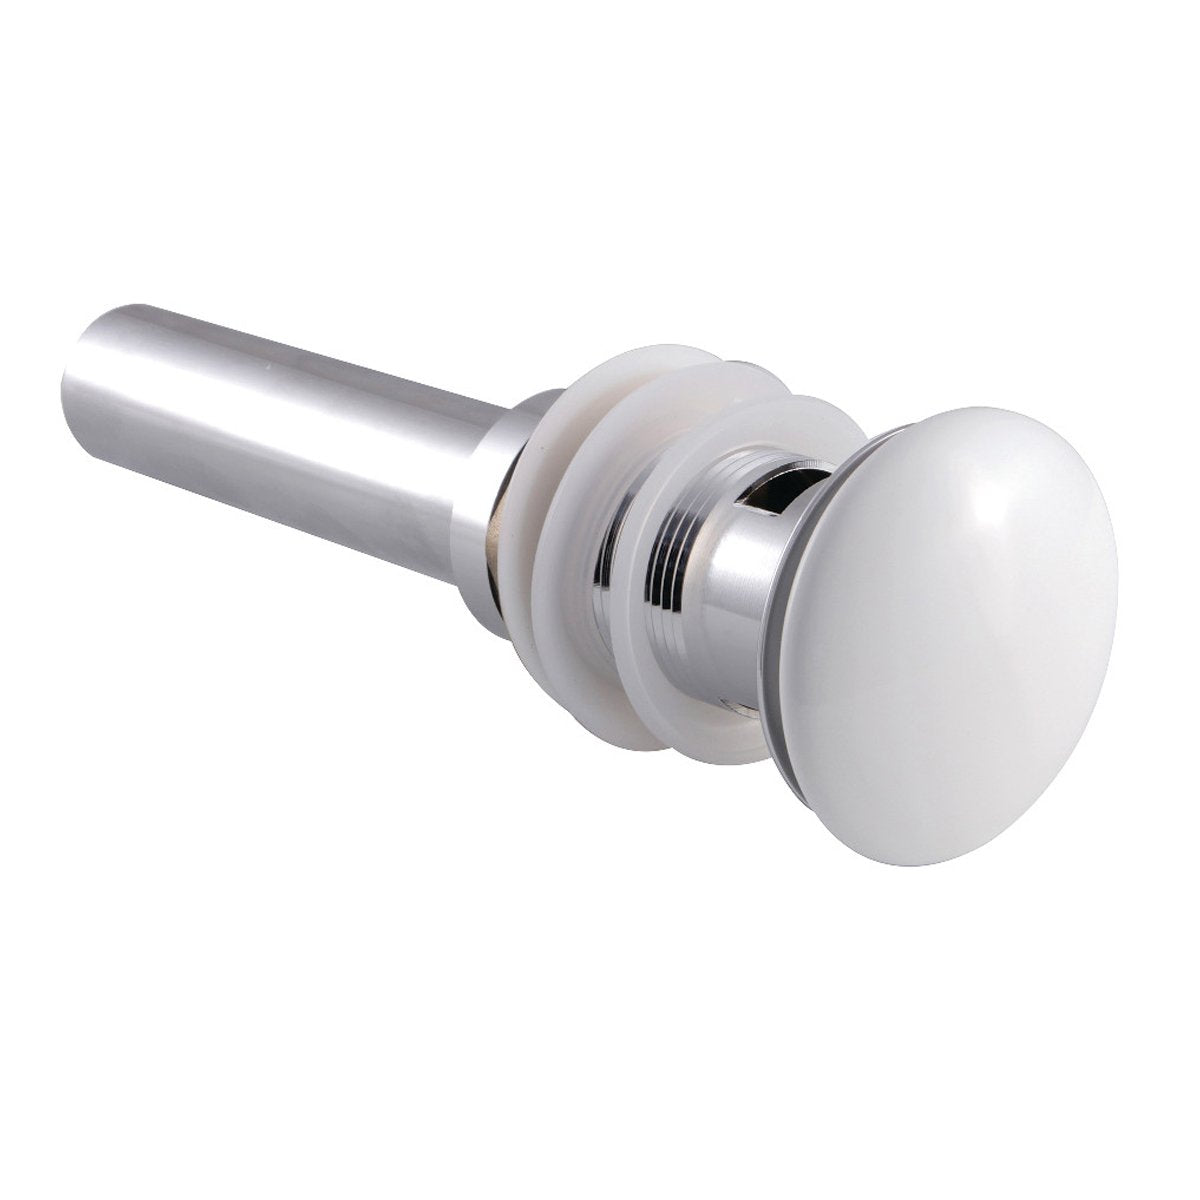 Kingston Brass Push Pop-Up Drain with Overflow Hole